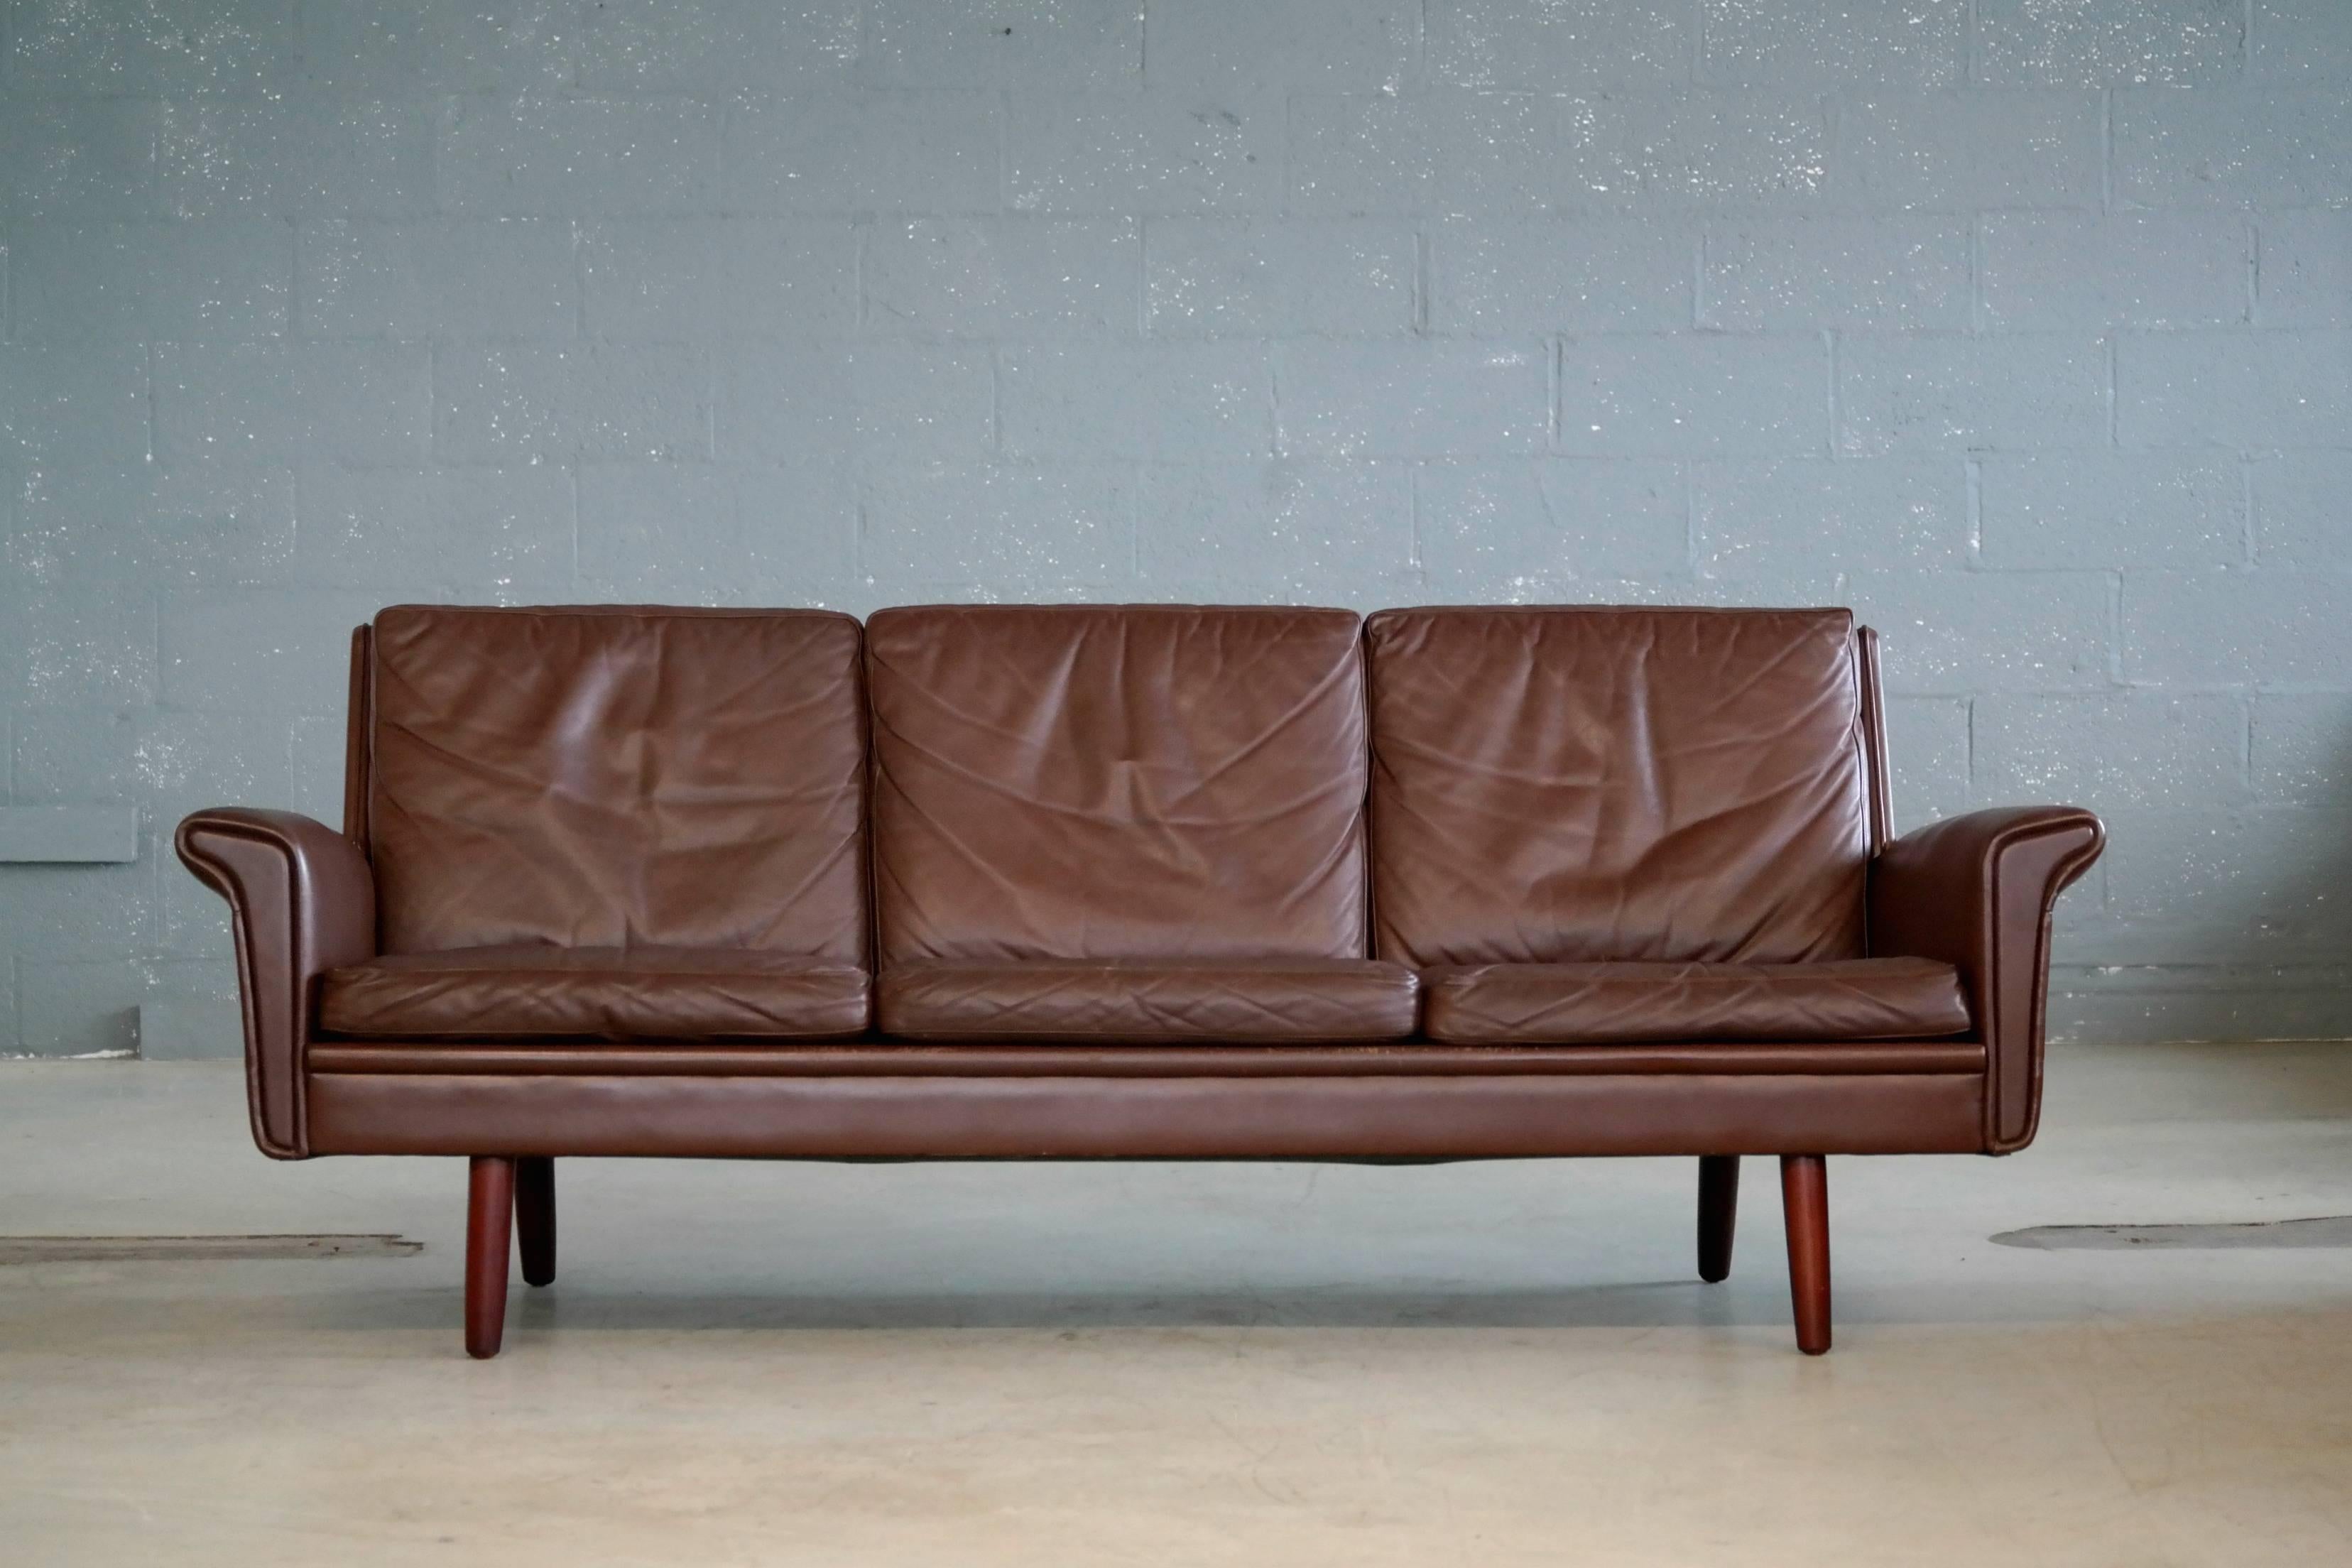 Classic Danish midcentury three-seat leather sofa in a nice warm chestnut color designed by Georg Thams in the late 1960s and manufactured by Vejen Polstermobelfabrik in Denmark. Very elegant with rolled armrests that almost reach out like small